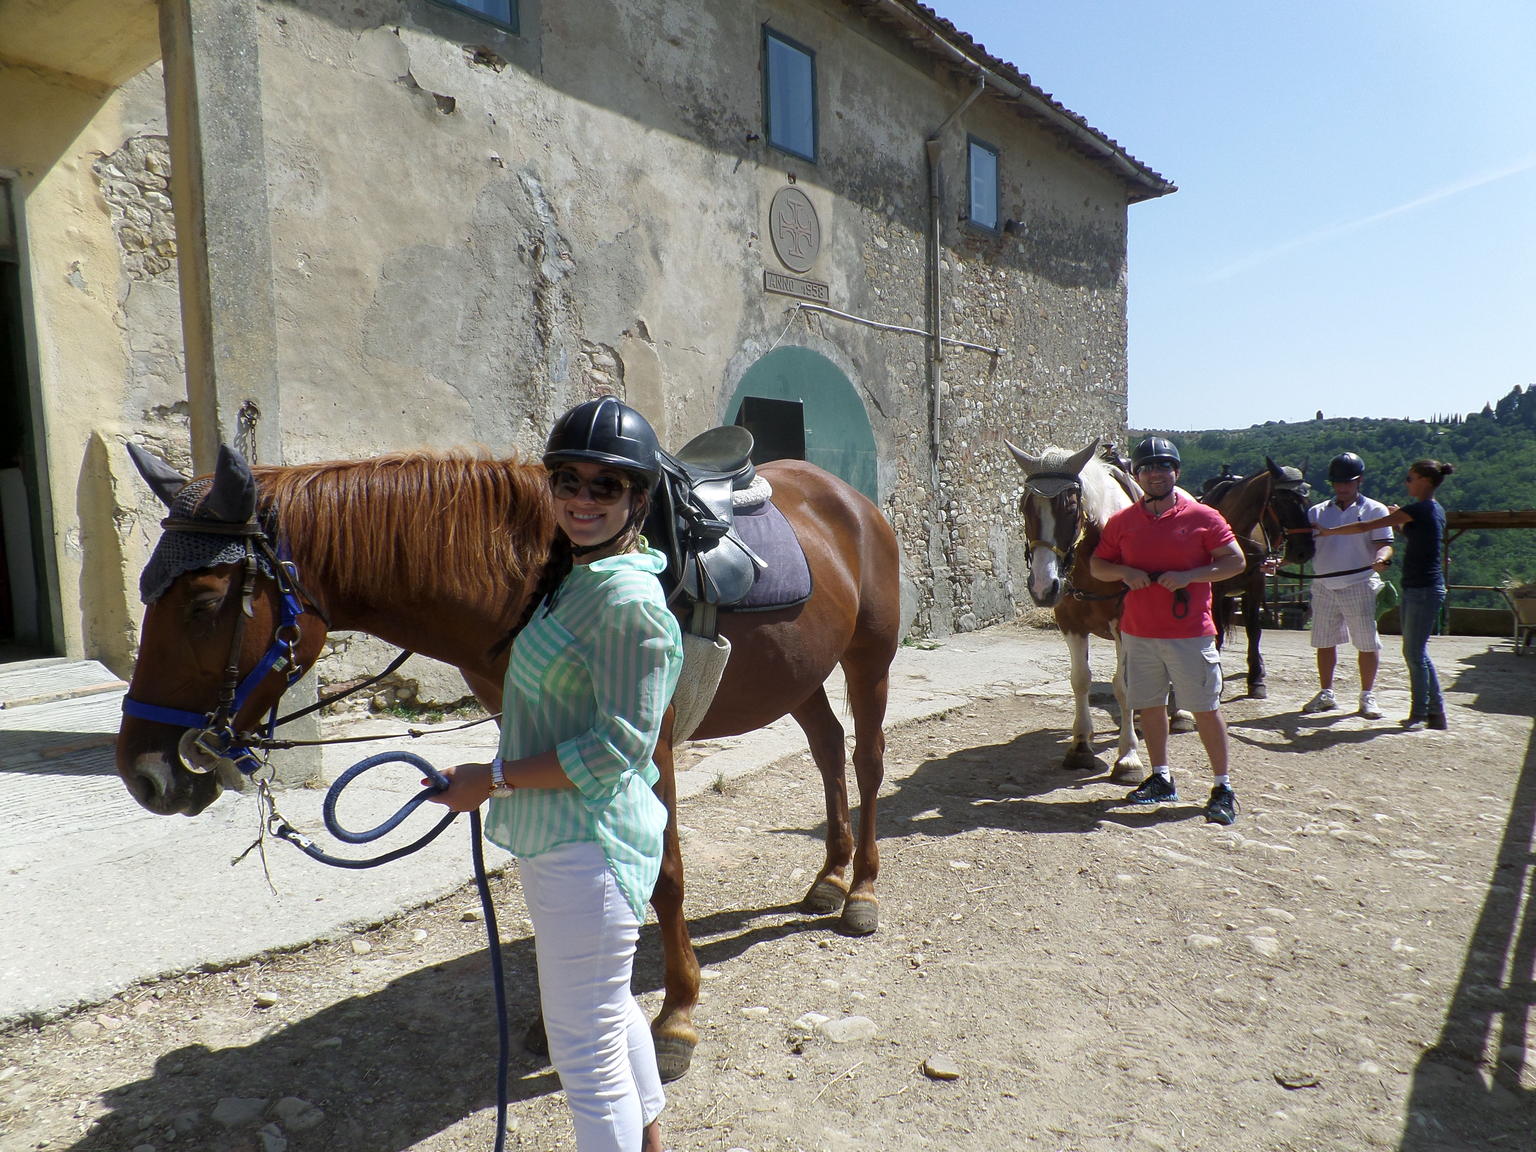 Horse back riding in Tuscany!